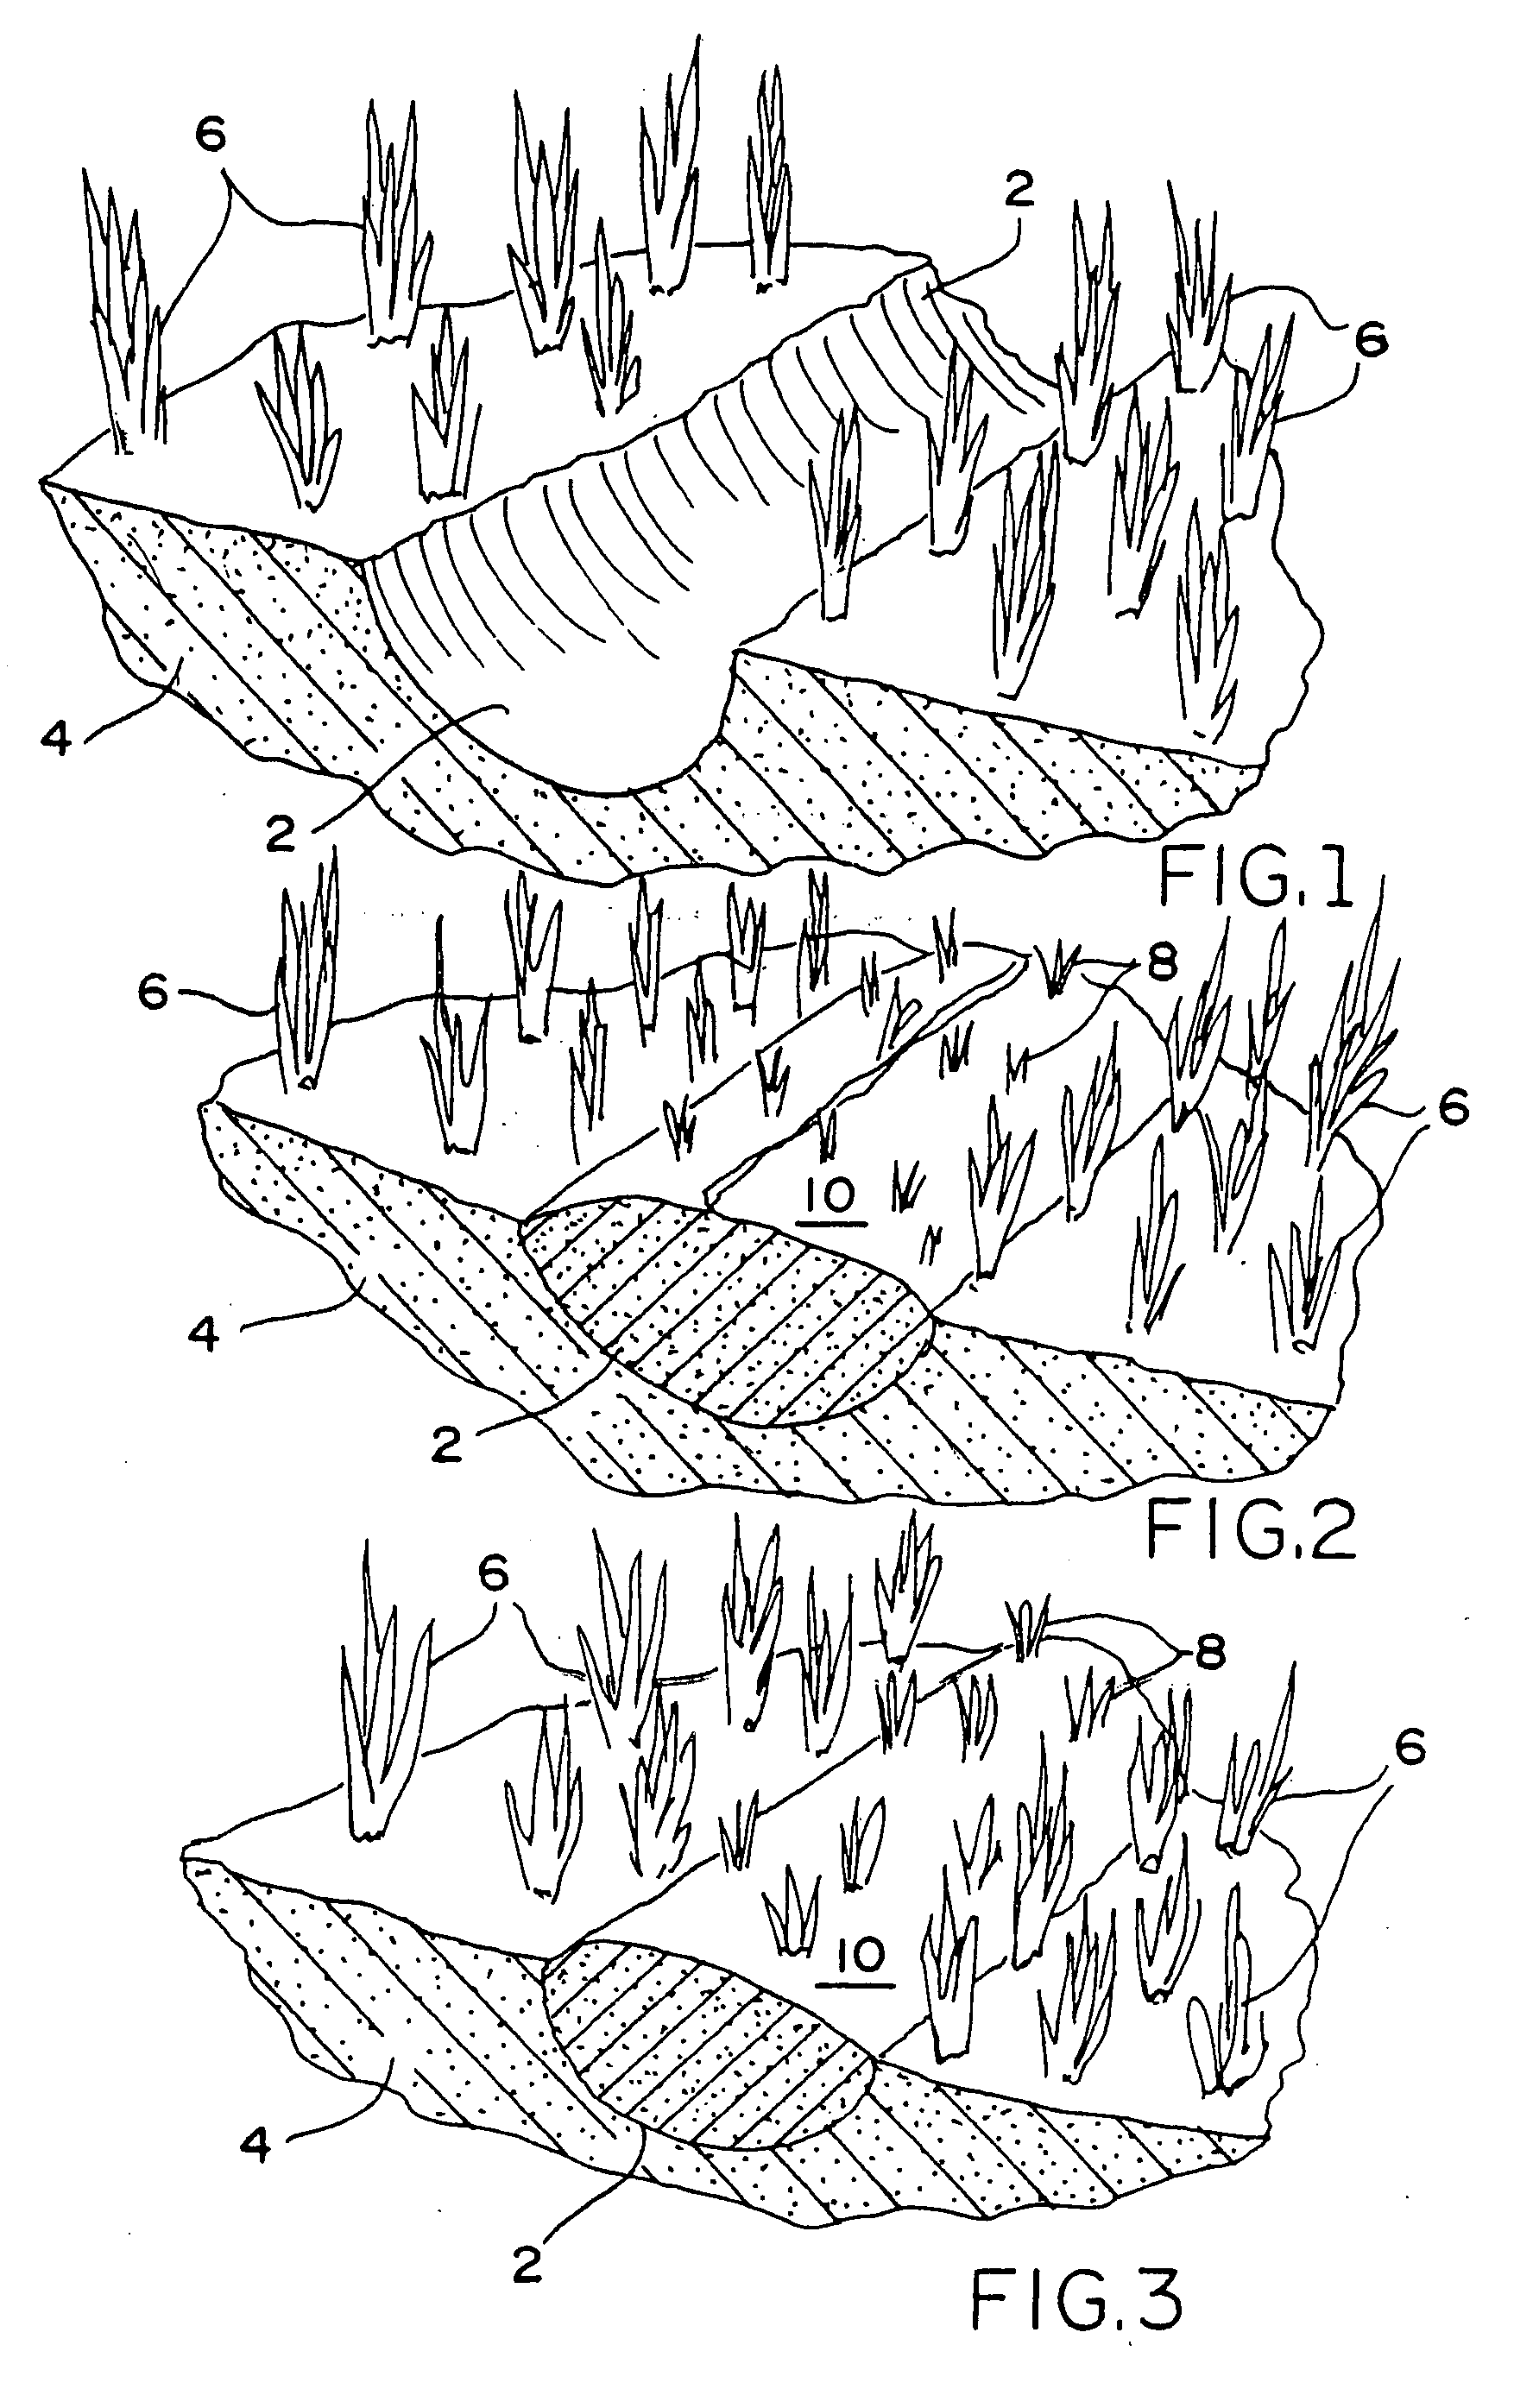 Process and related apparatus for repairing aquatic propeller scars